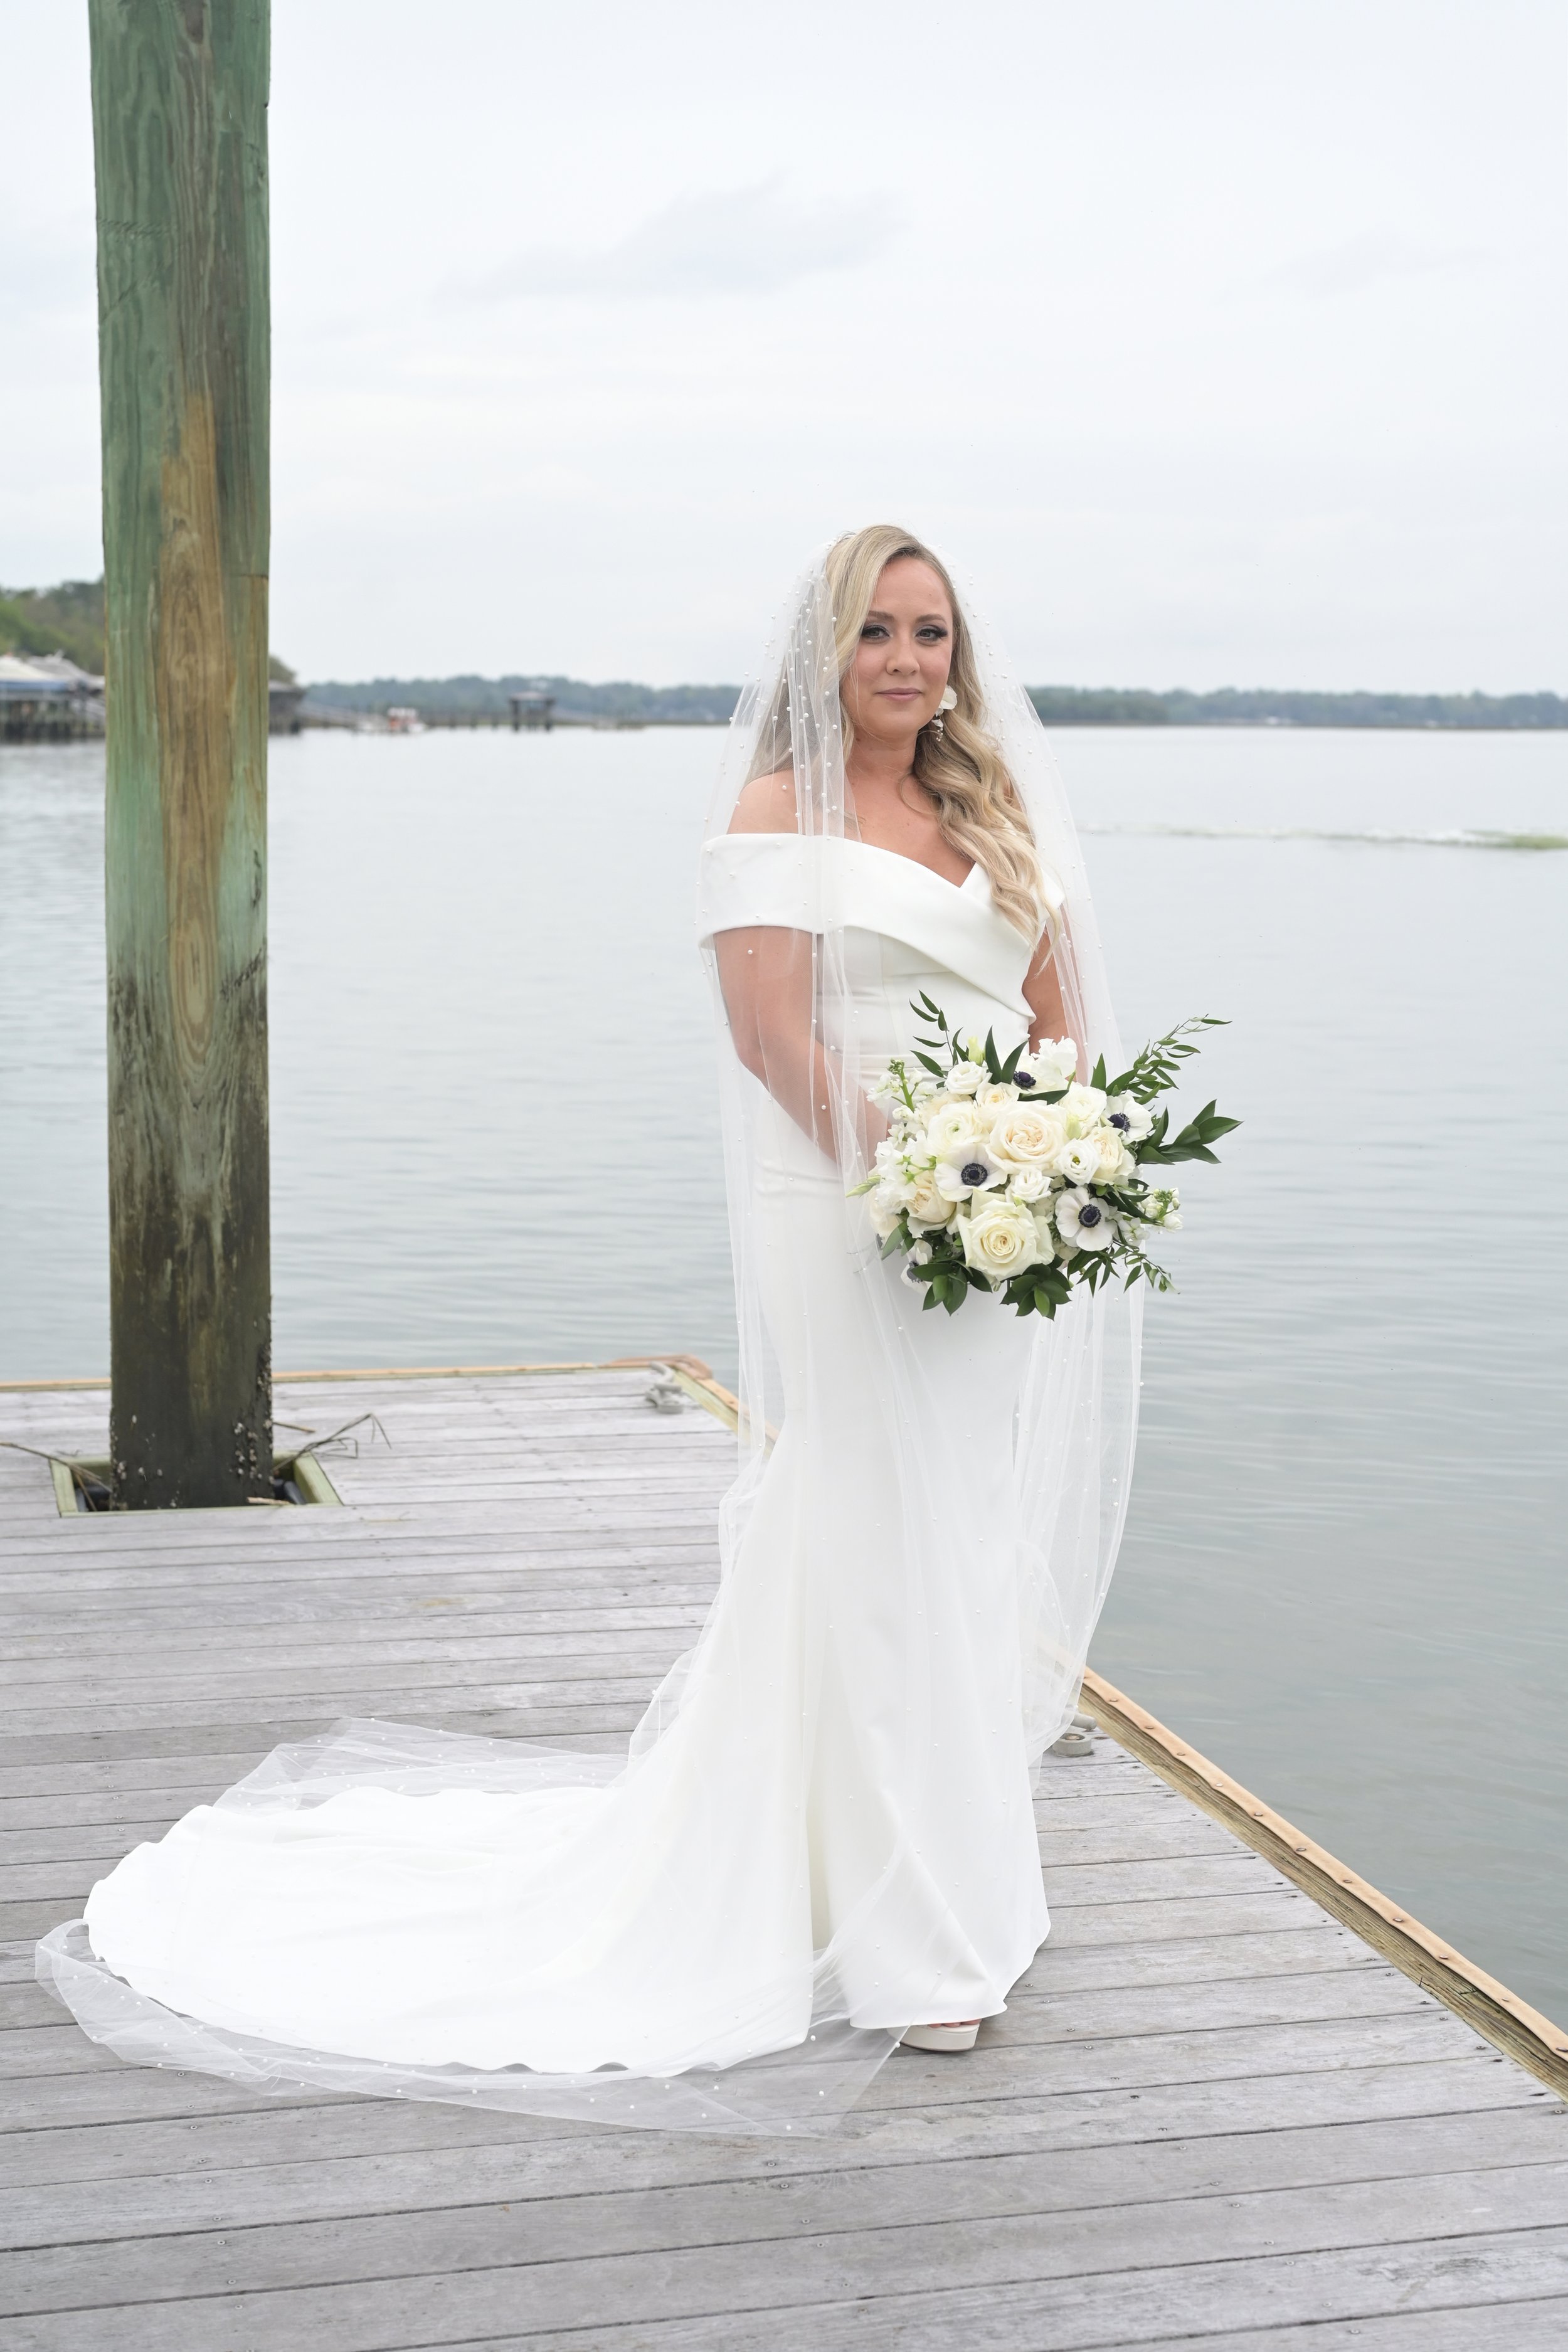 real-savanna-bride-in-the-lottie-gown-by-made-wth-love-purchased-from-savannah-bridal-shop-ivory-and-beau-savannah-bridal-boutique-savannah-wedding-gowns-savannah-wedding-dresses-8.JPG